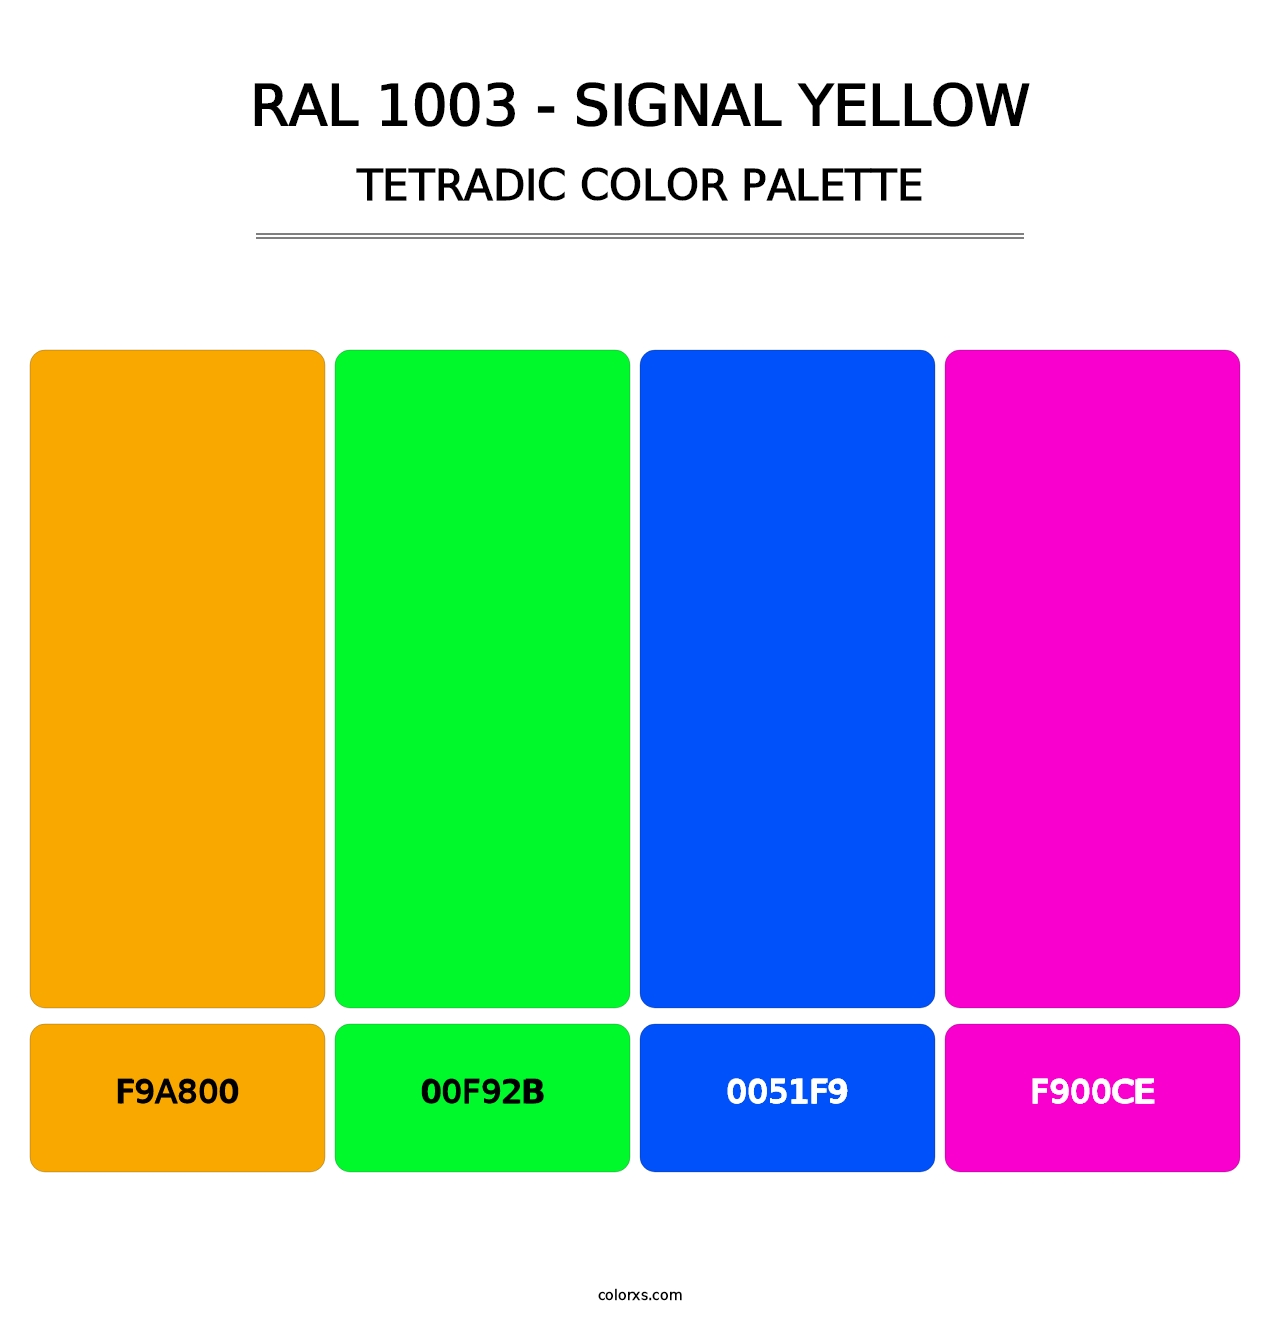 RAL 1003 - Signal Yellow - Tetradic Color Palette